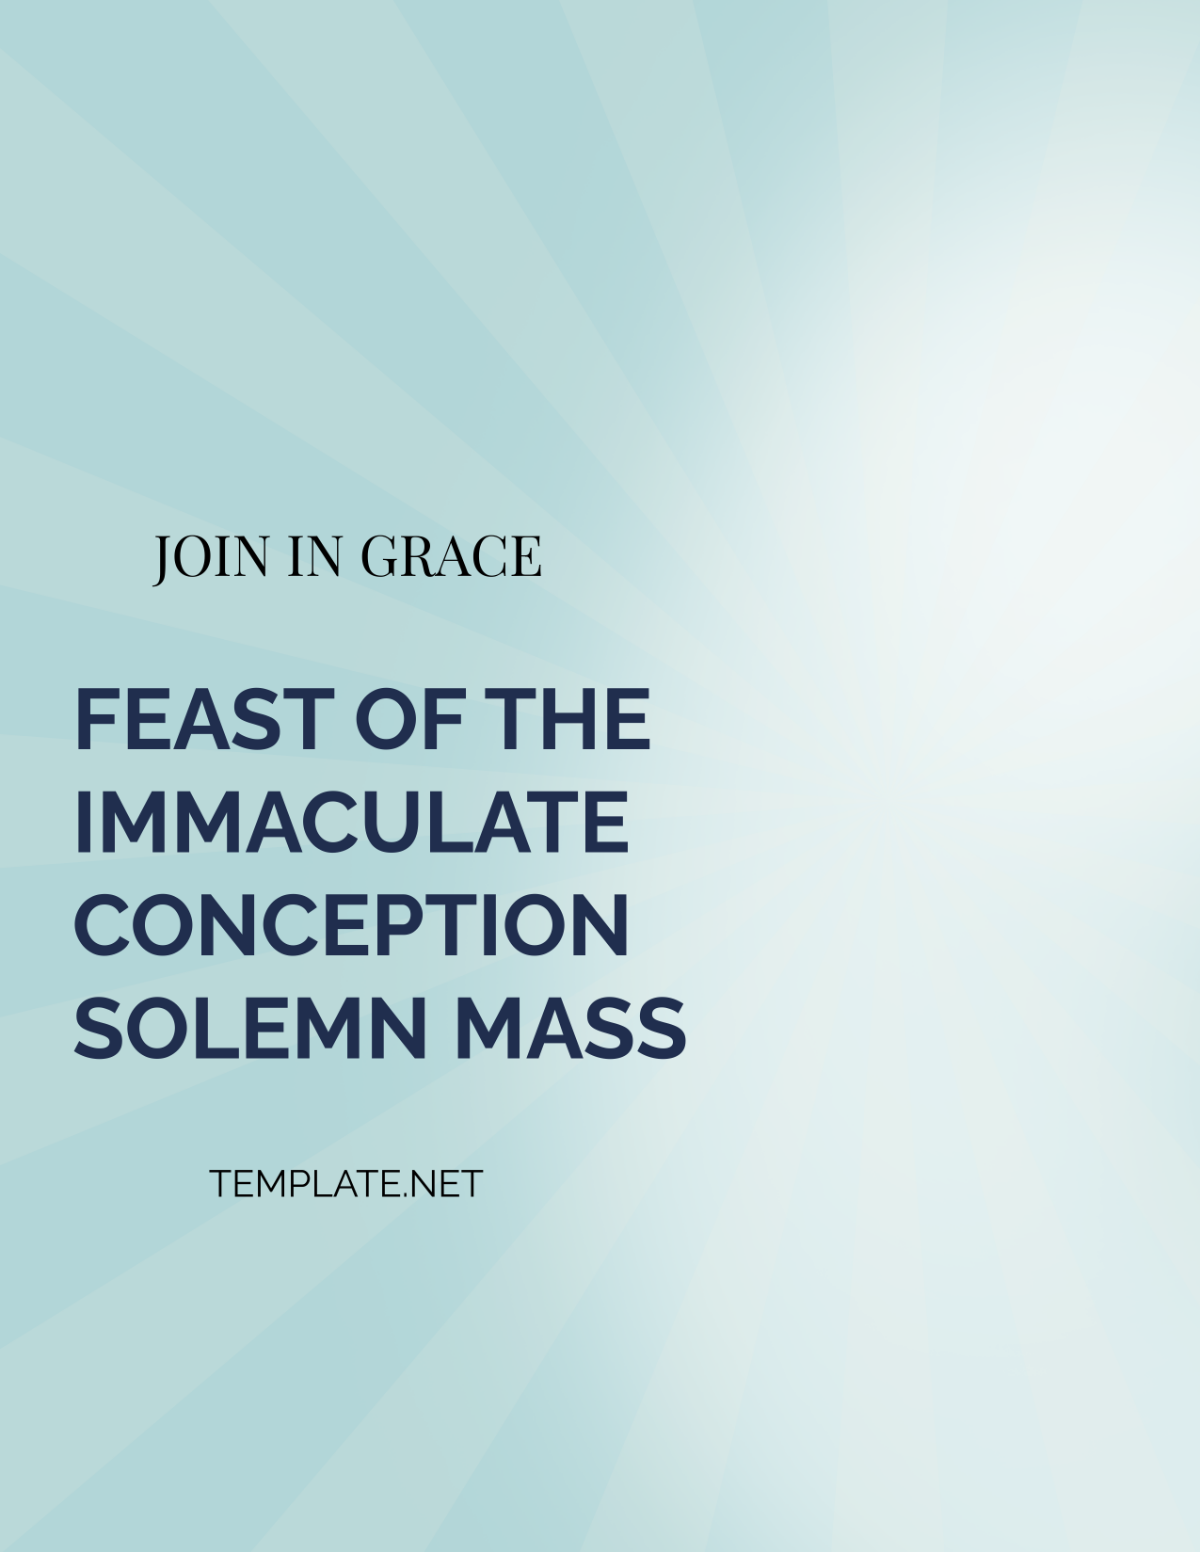 Feast of the Immaculate Conception Month Celebration